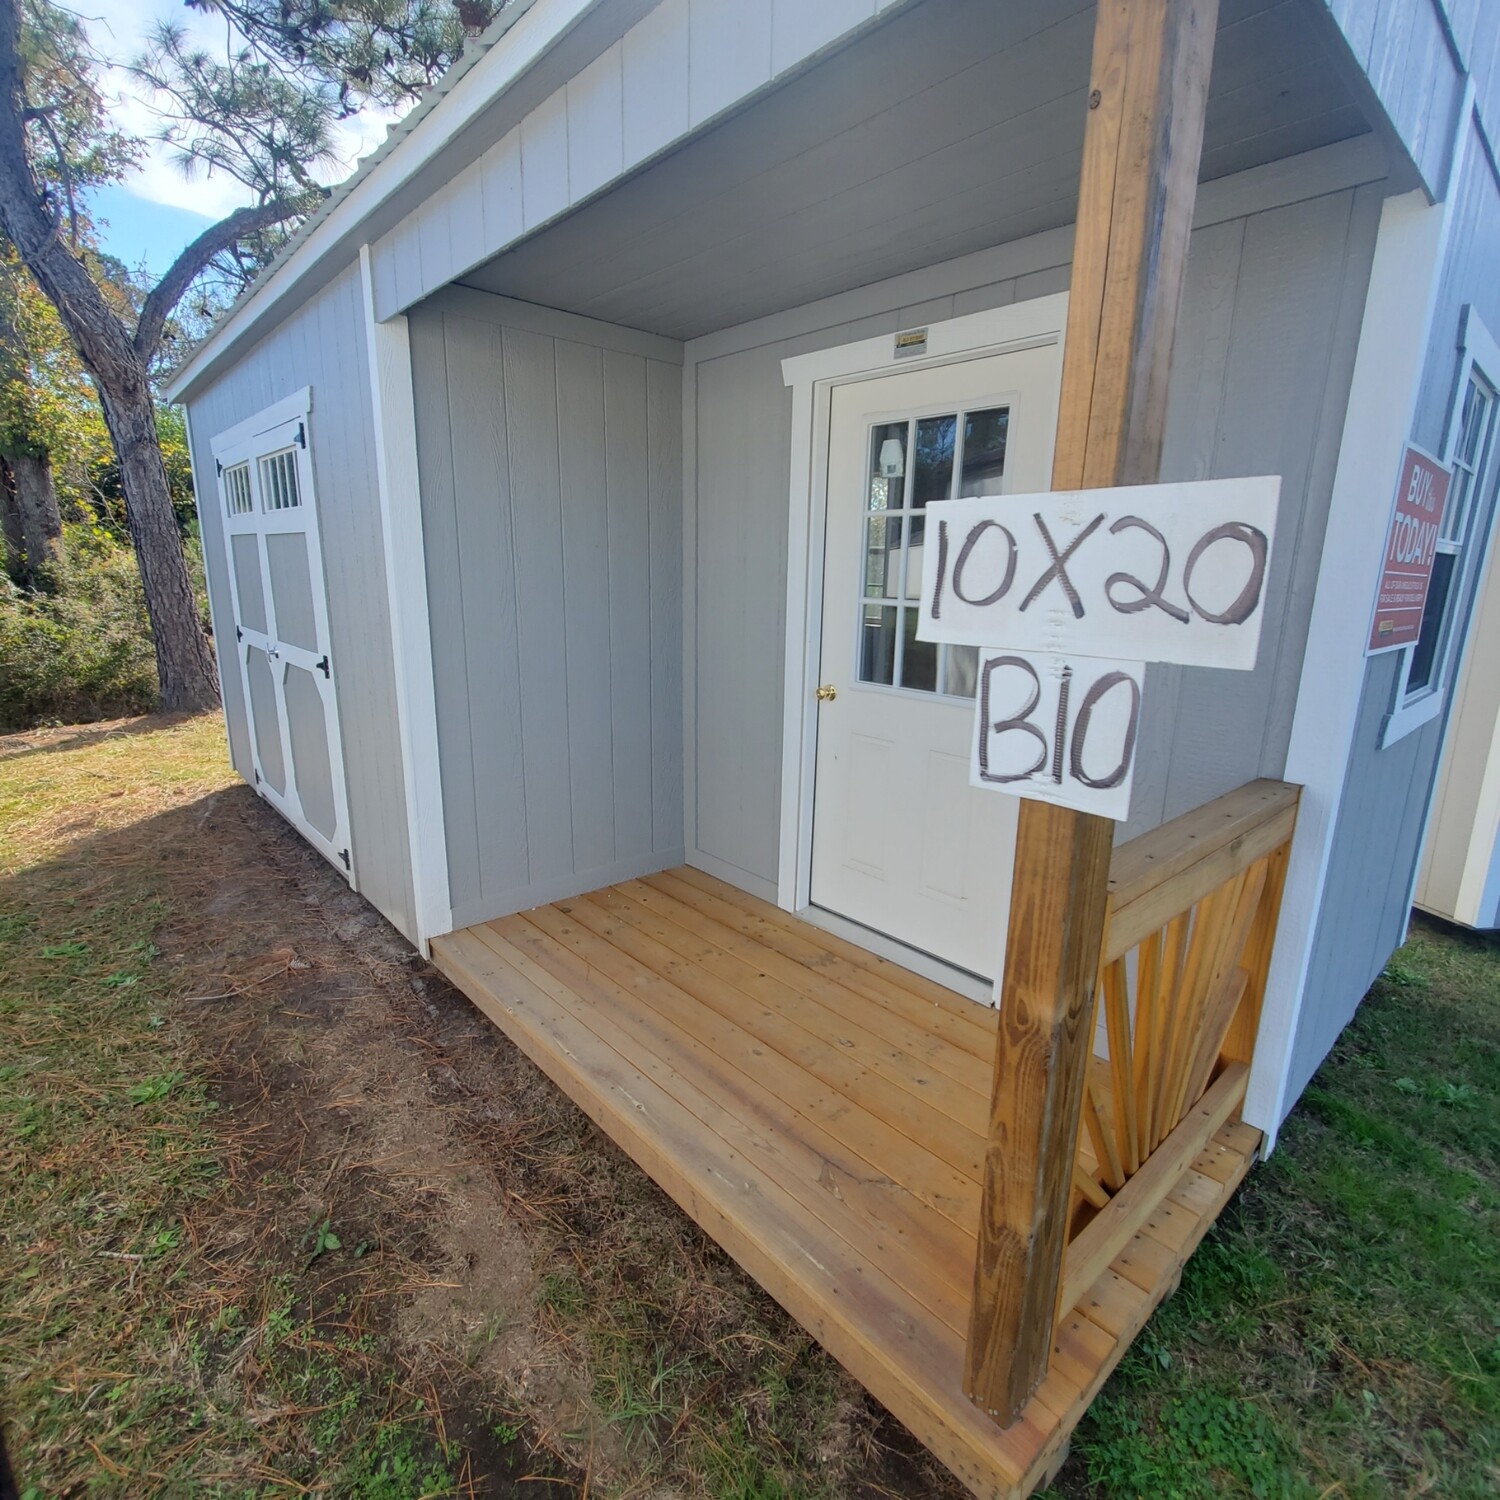 10x20 Utility Shed  - Side Porch